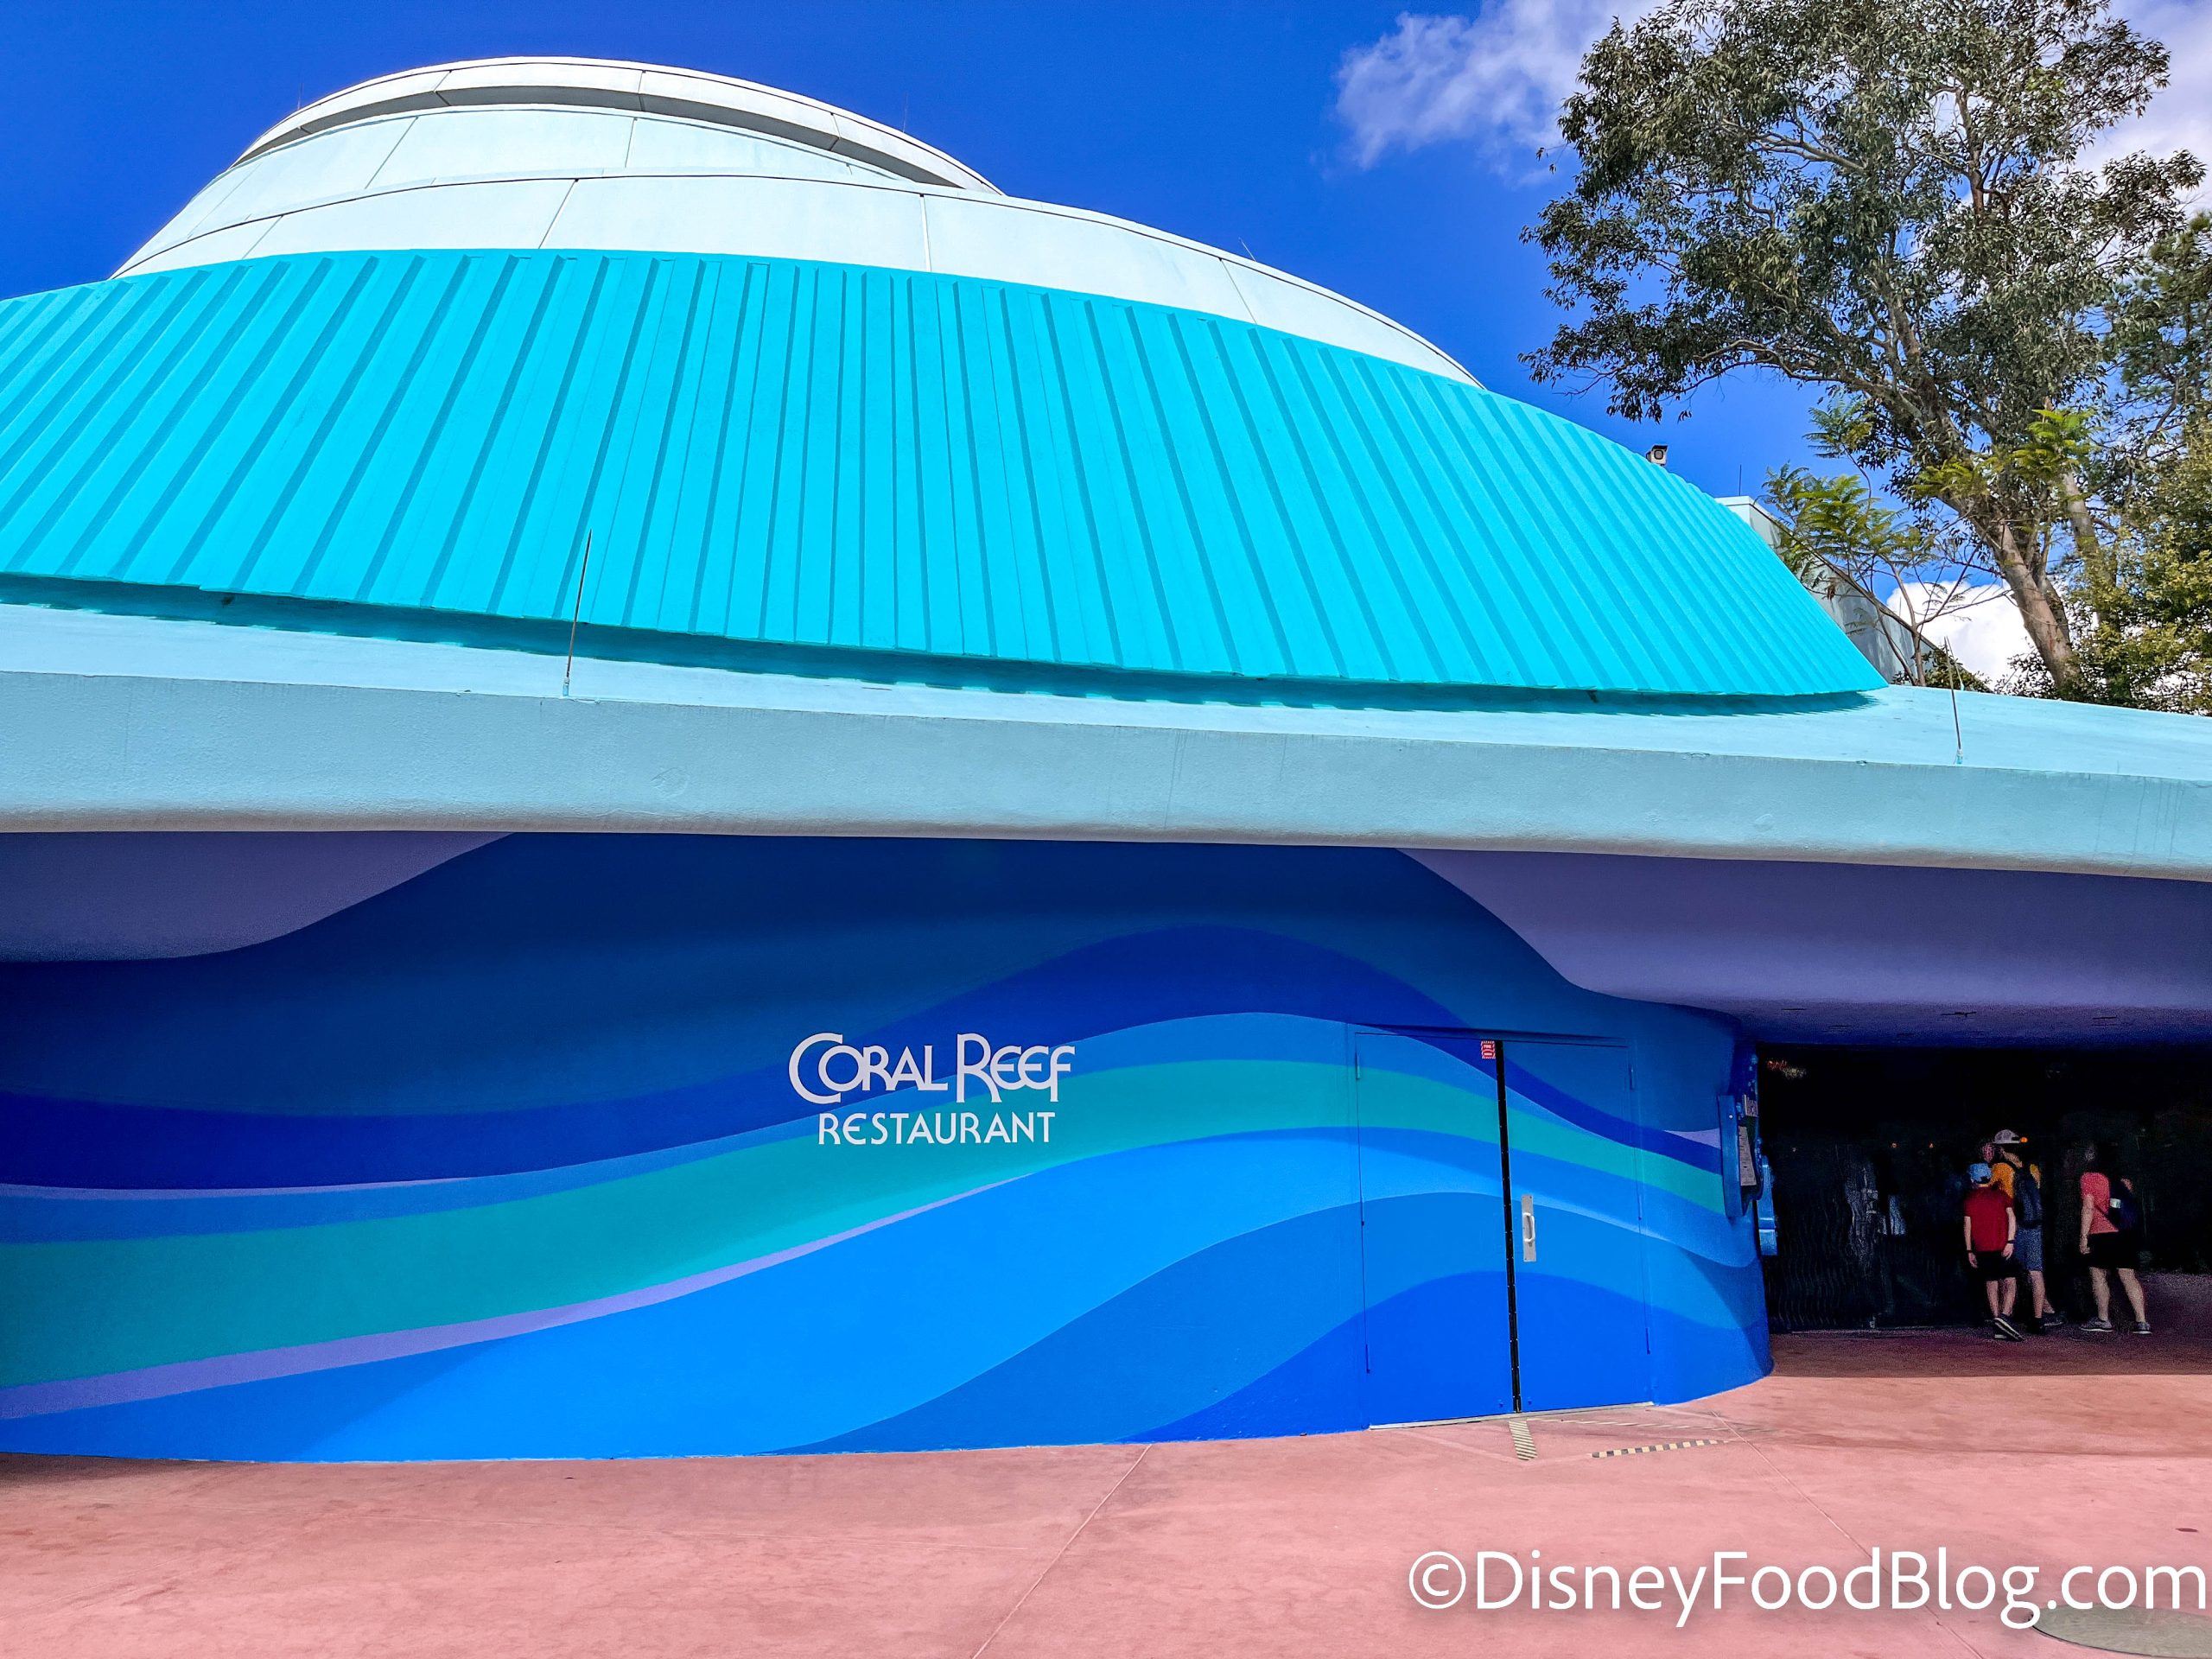 https://www.disneyfoodblog.com/wp-content/uploads/2023/02/wdw-2022-epcot-coral-reef-restaurant-atmosphere_-scaled.jpg